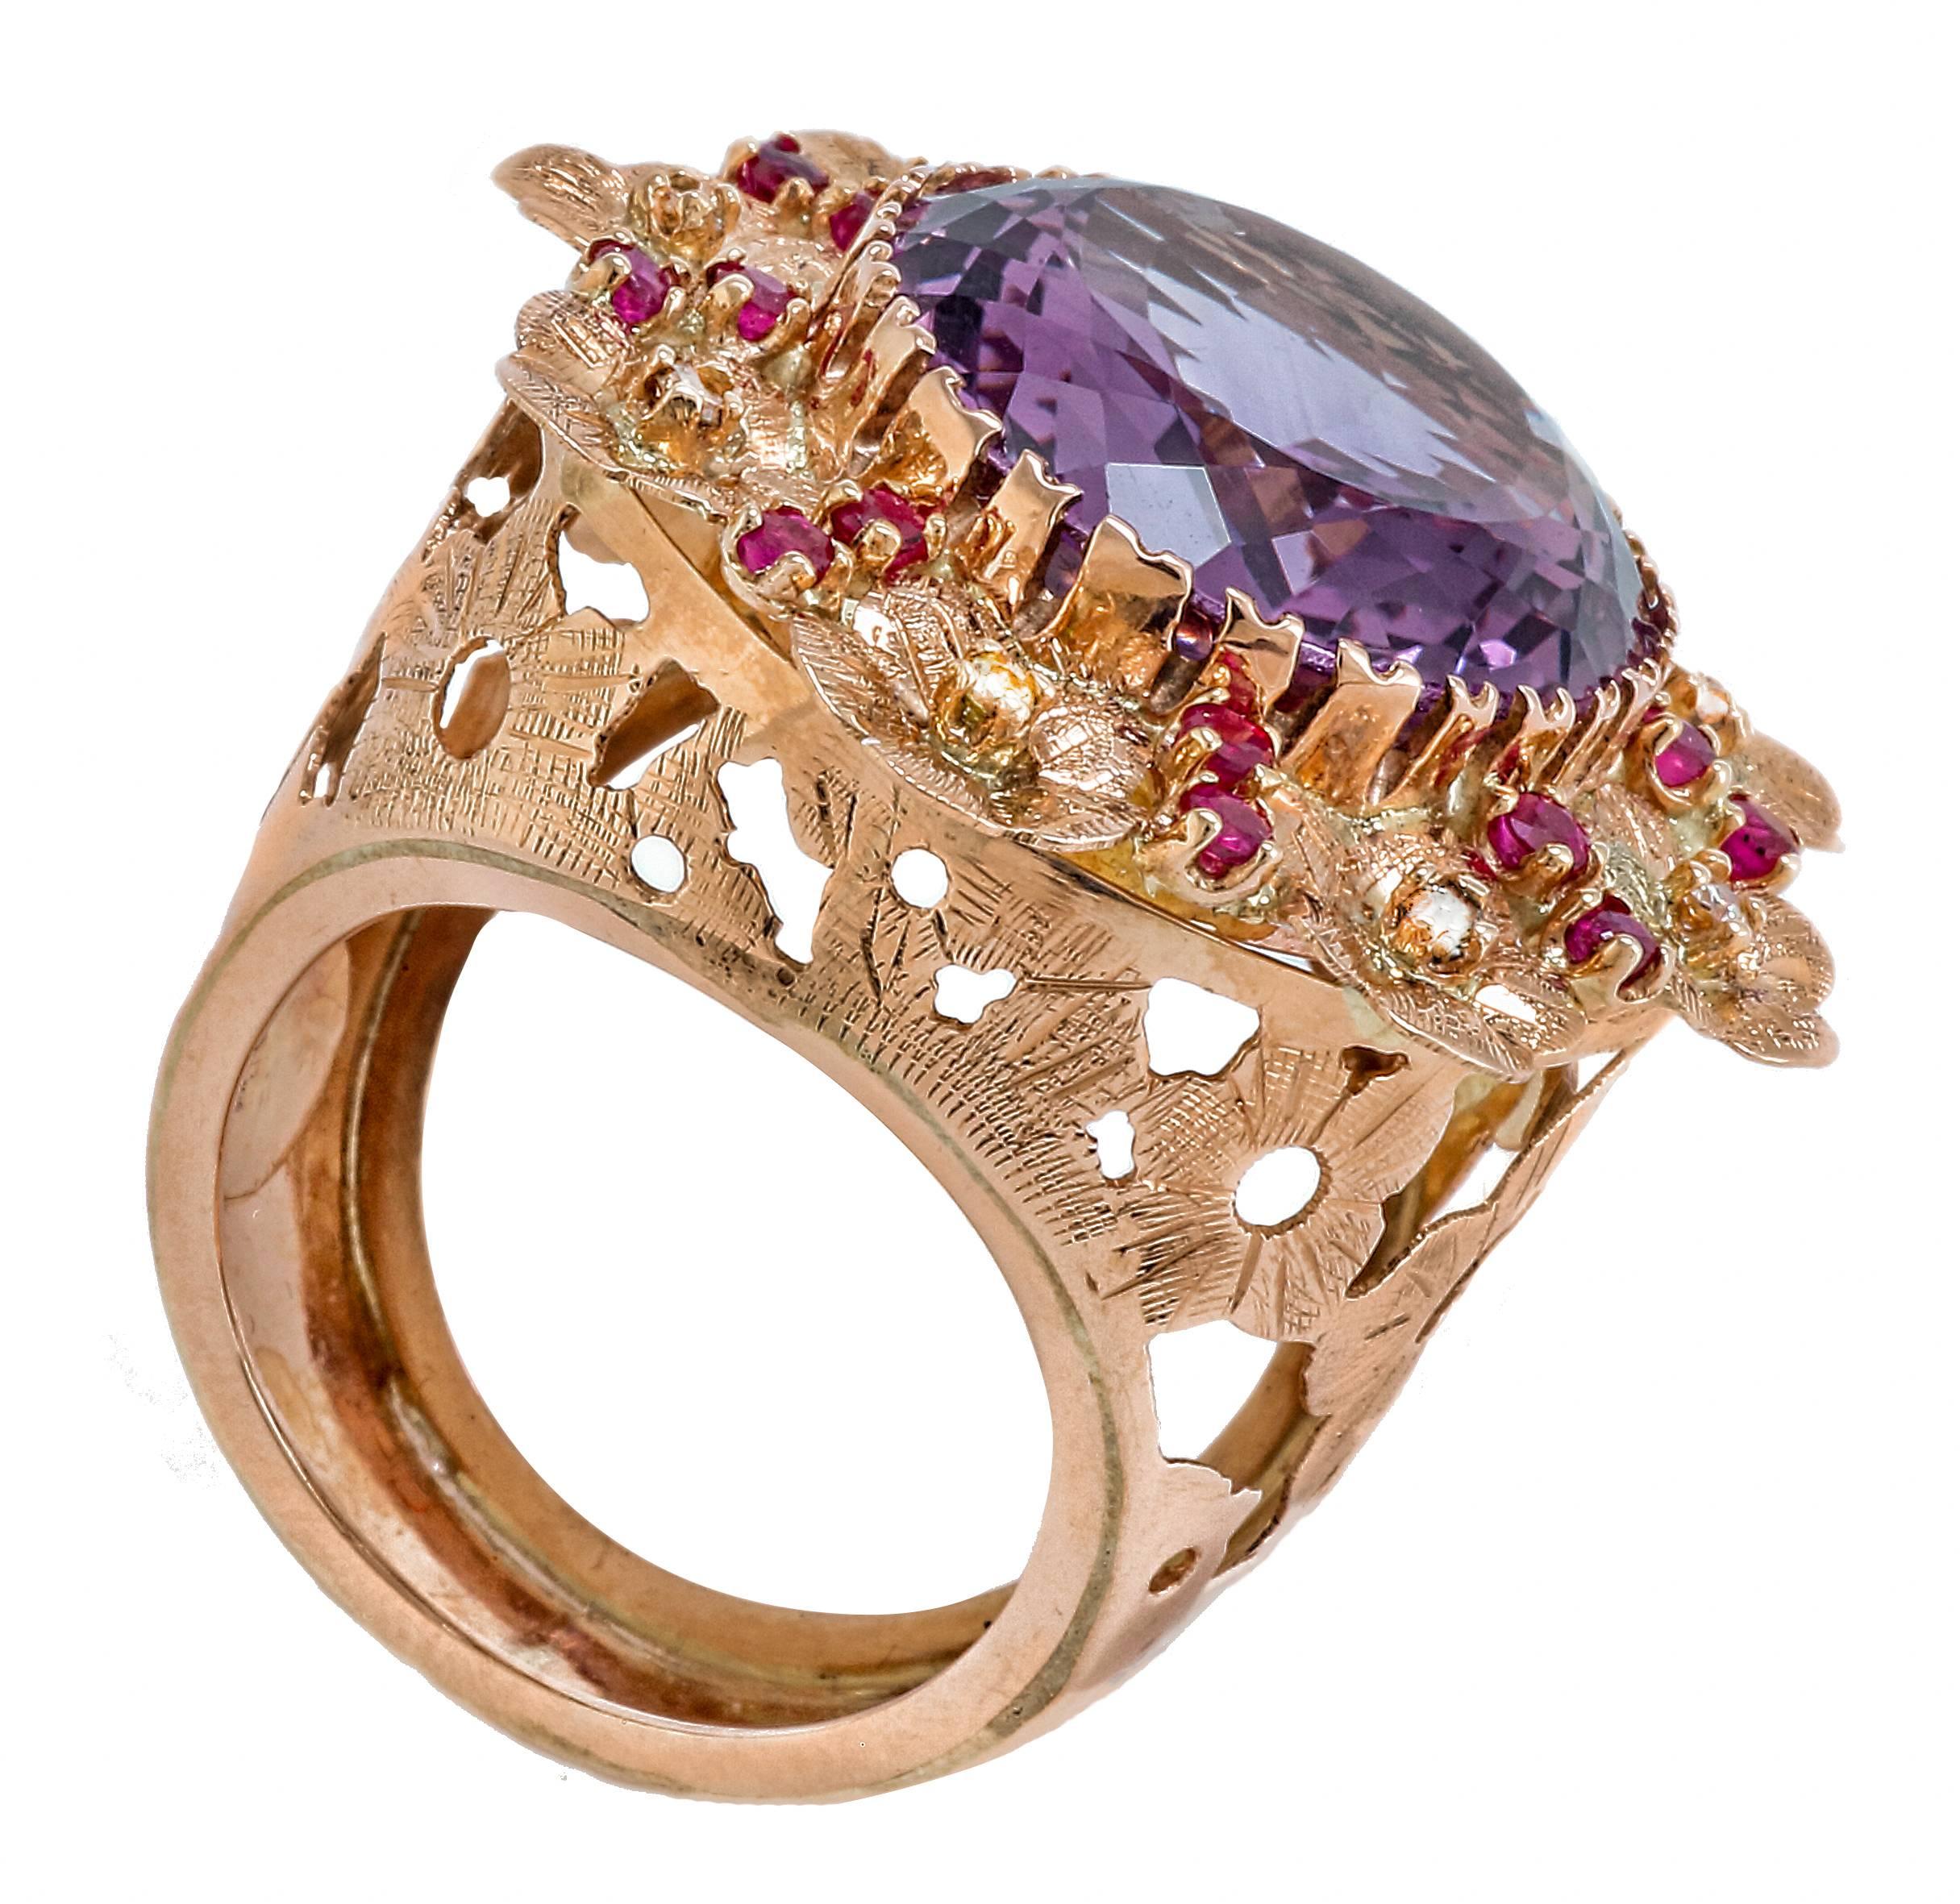 Beautiful ring in 14 kt rose gold, flowers pierced on the stem and small flowers embellished with diamonds of ct 0.21 and rubies of ct 0.88 that all rotate intono to a fabulous amethyst of ct 17.81. Total weight g 14.9
Diamonds ct 0.21
Amethyst ct